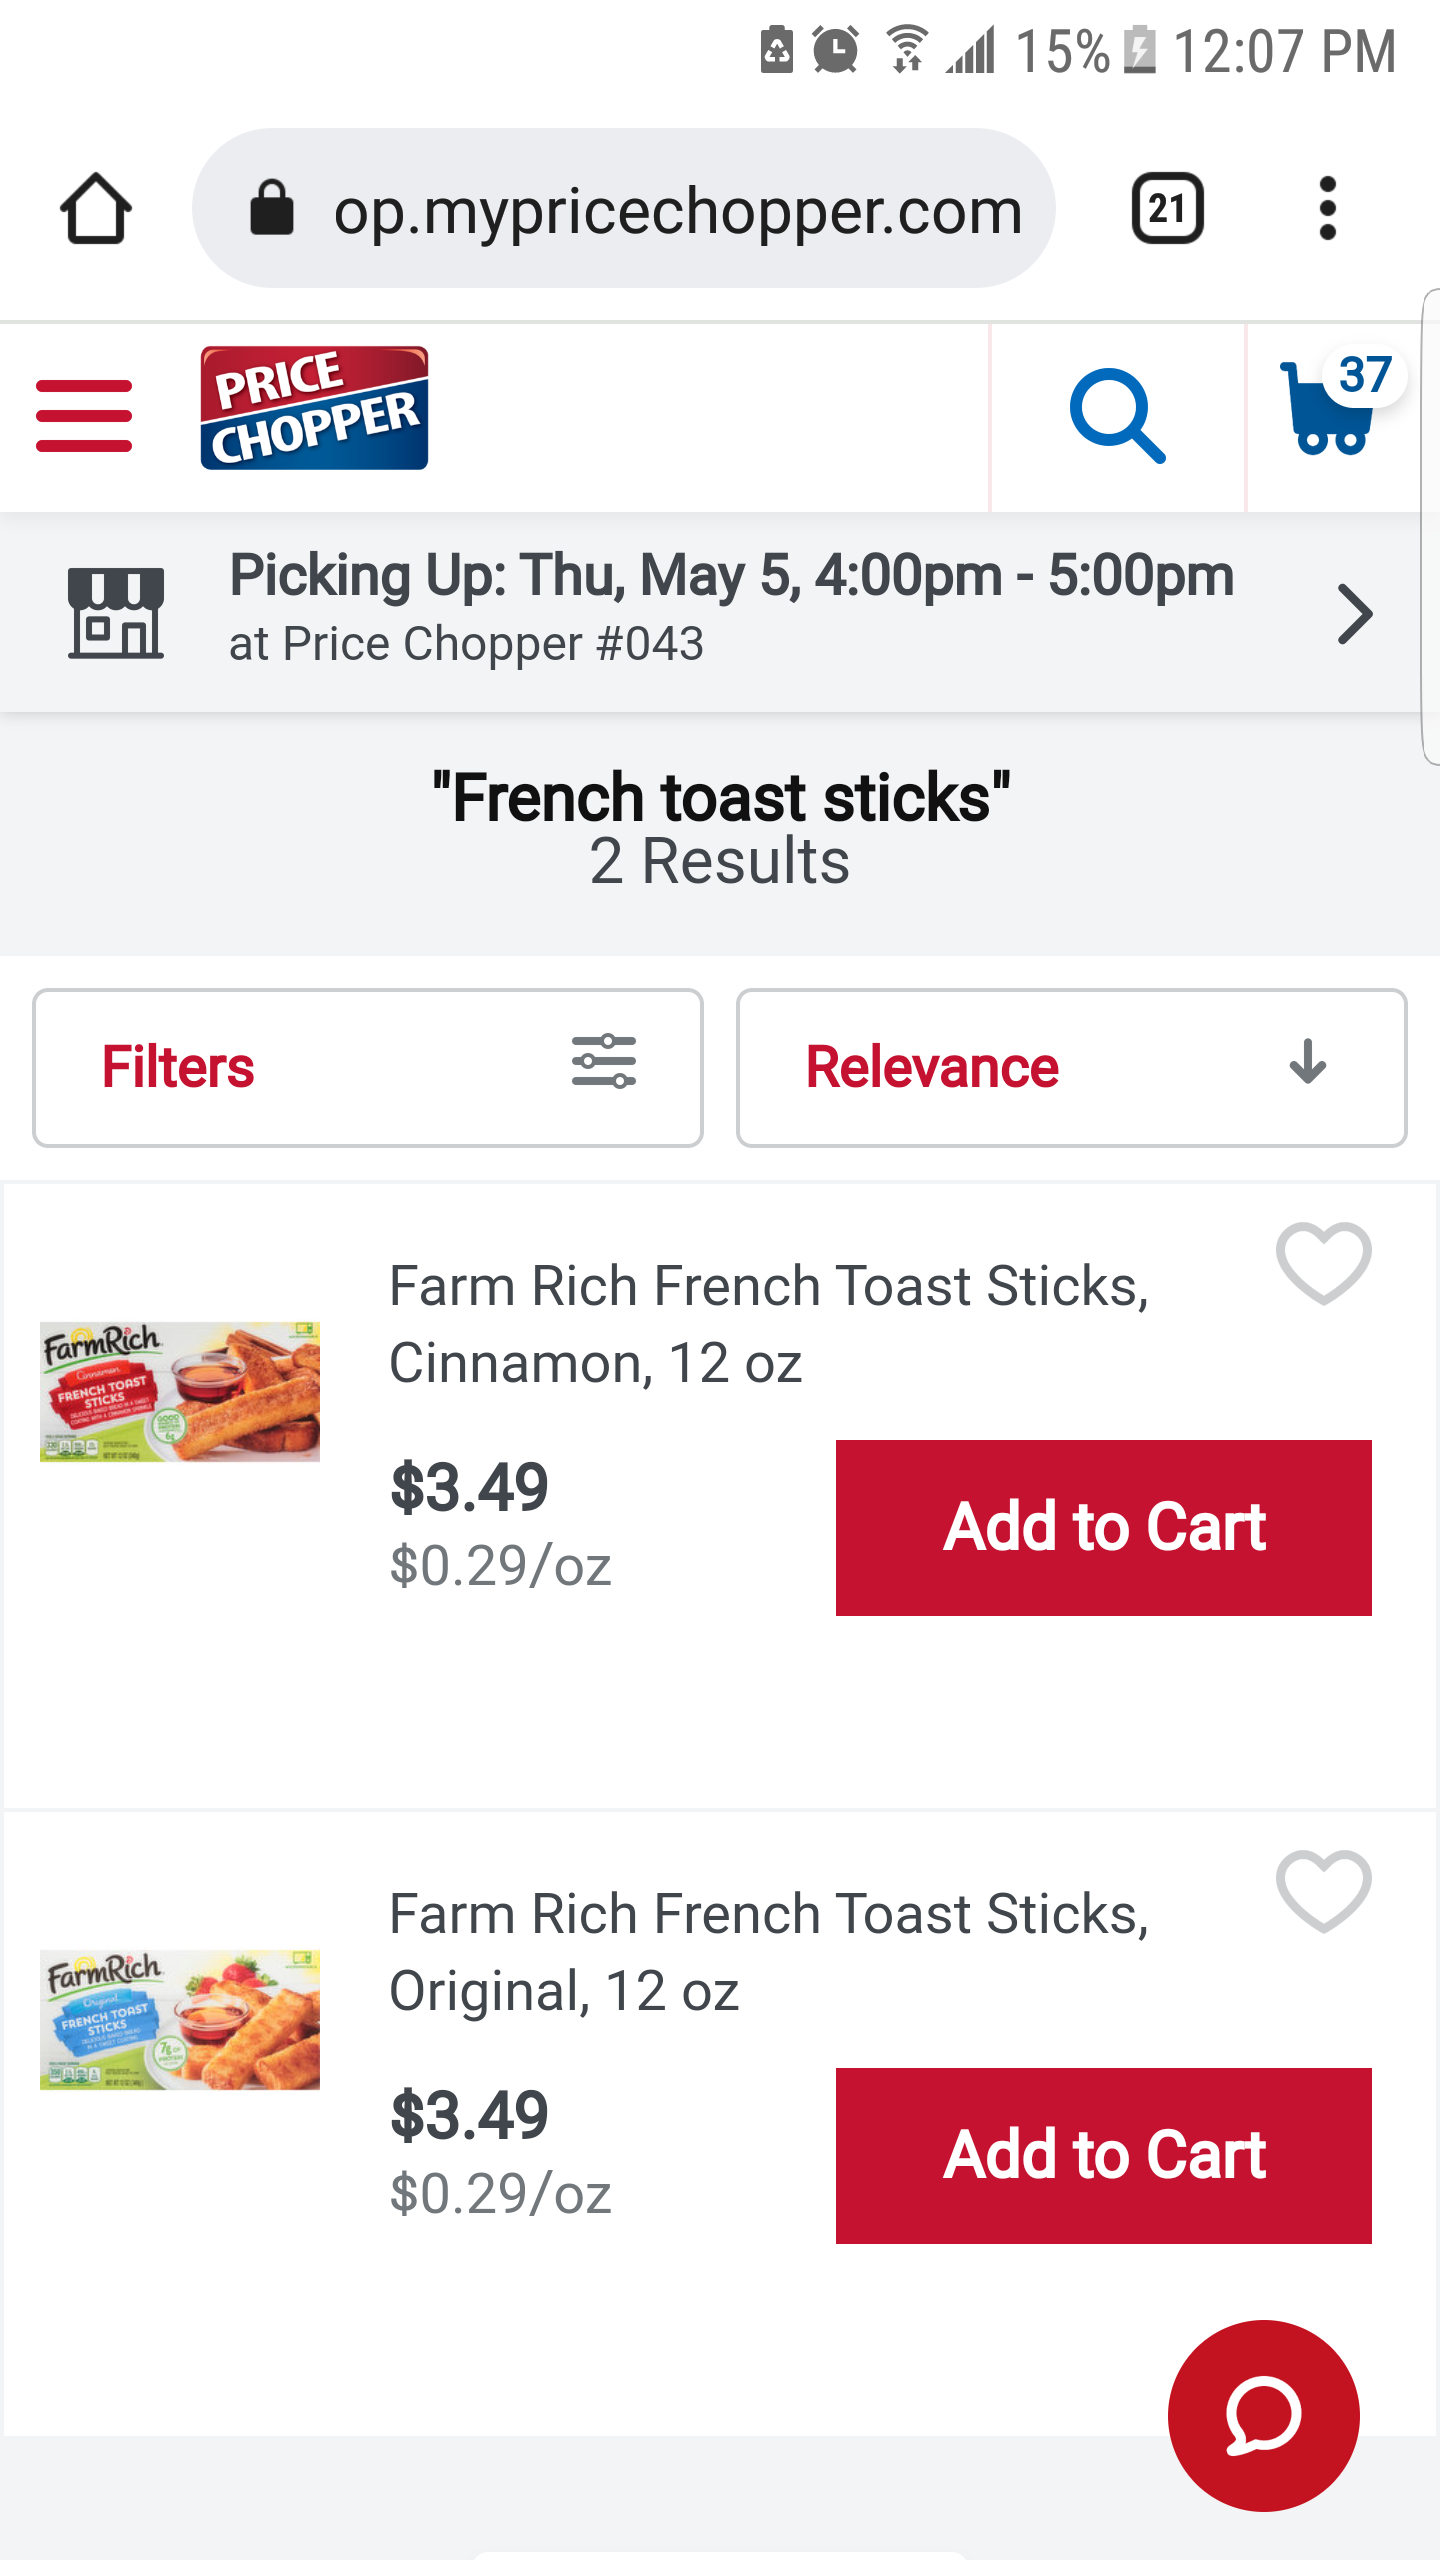 Price Chopper site search results for french toast sticks two items found